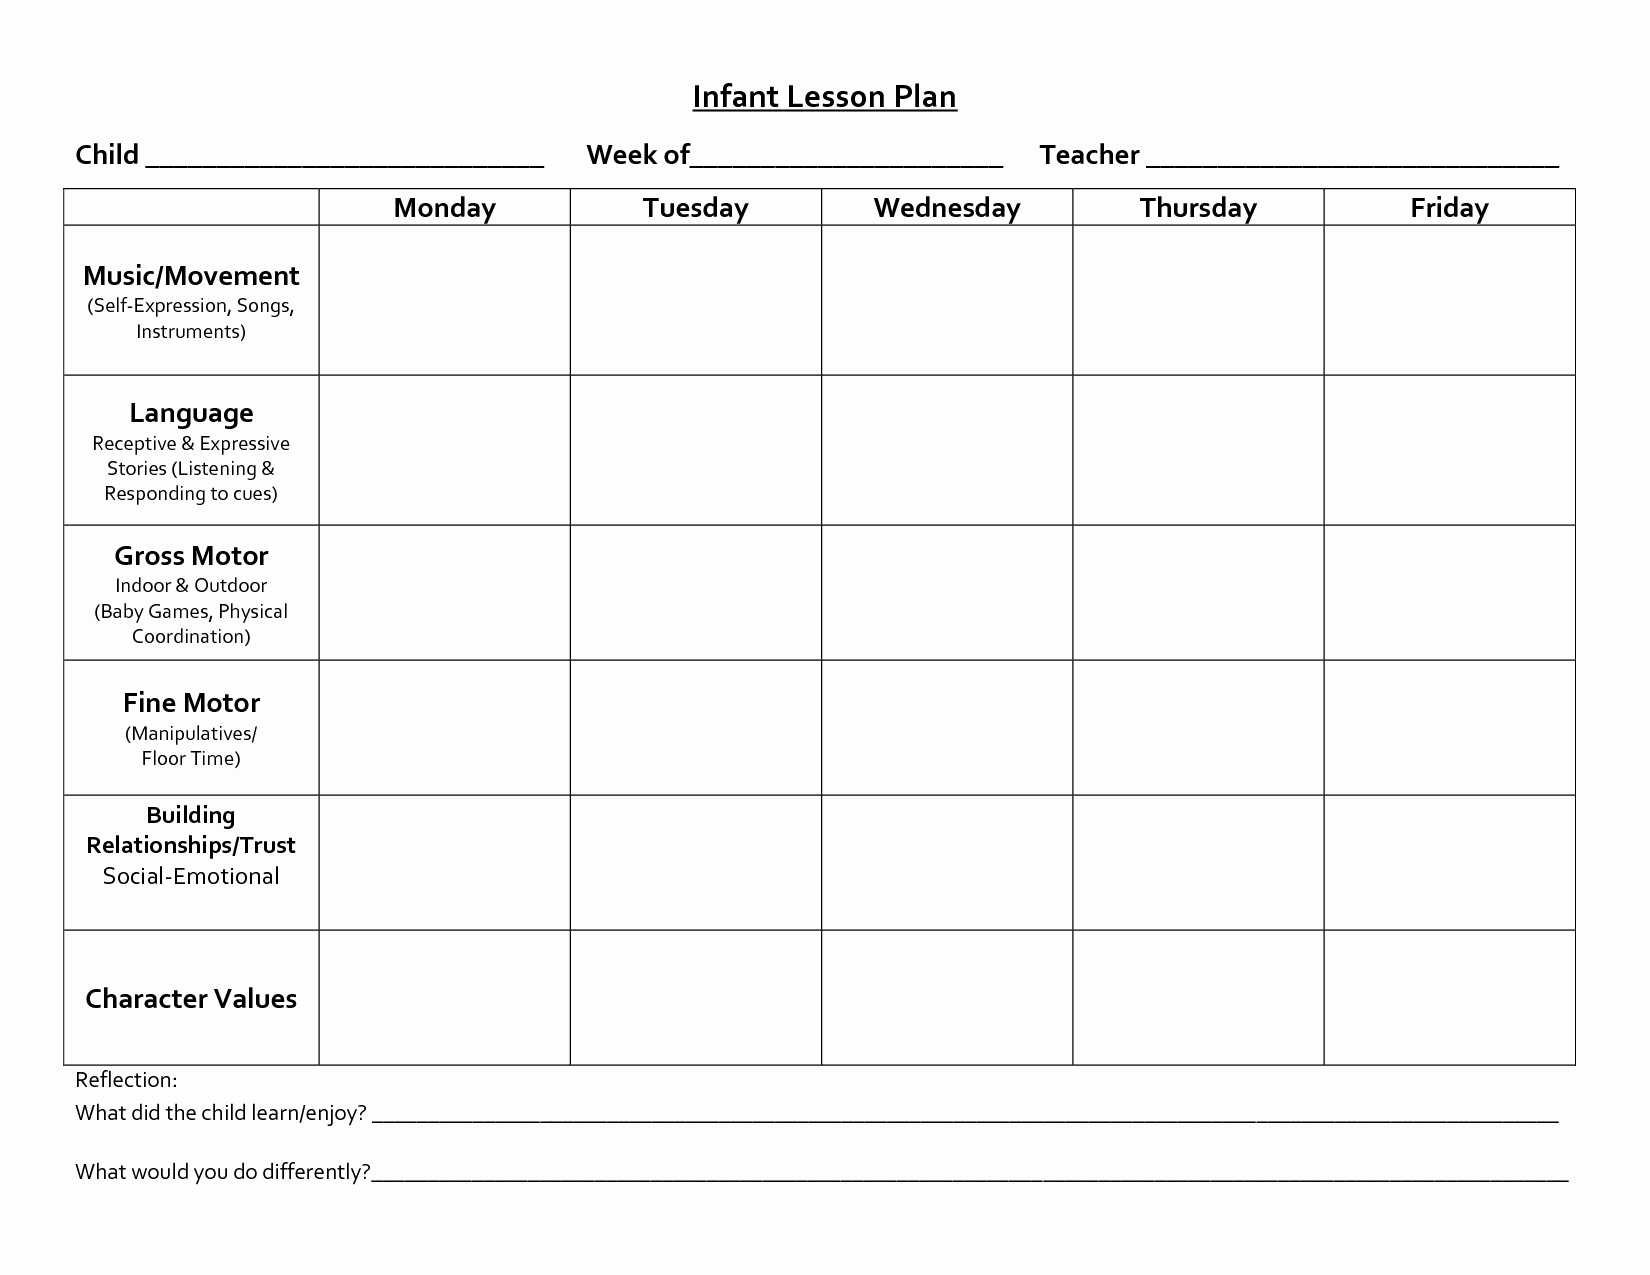 Infant Weekly Lesson Plan Best Of Infant Blank Lesson Plan Sheets